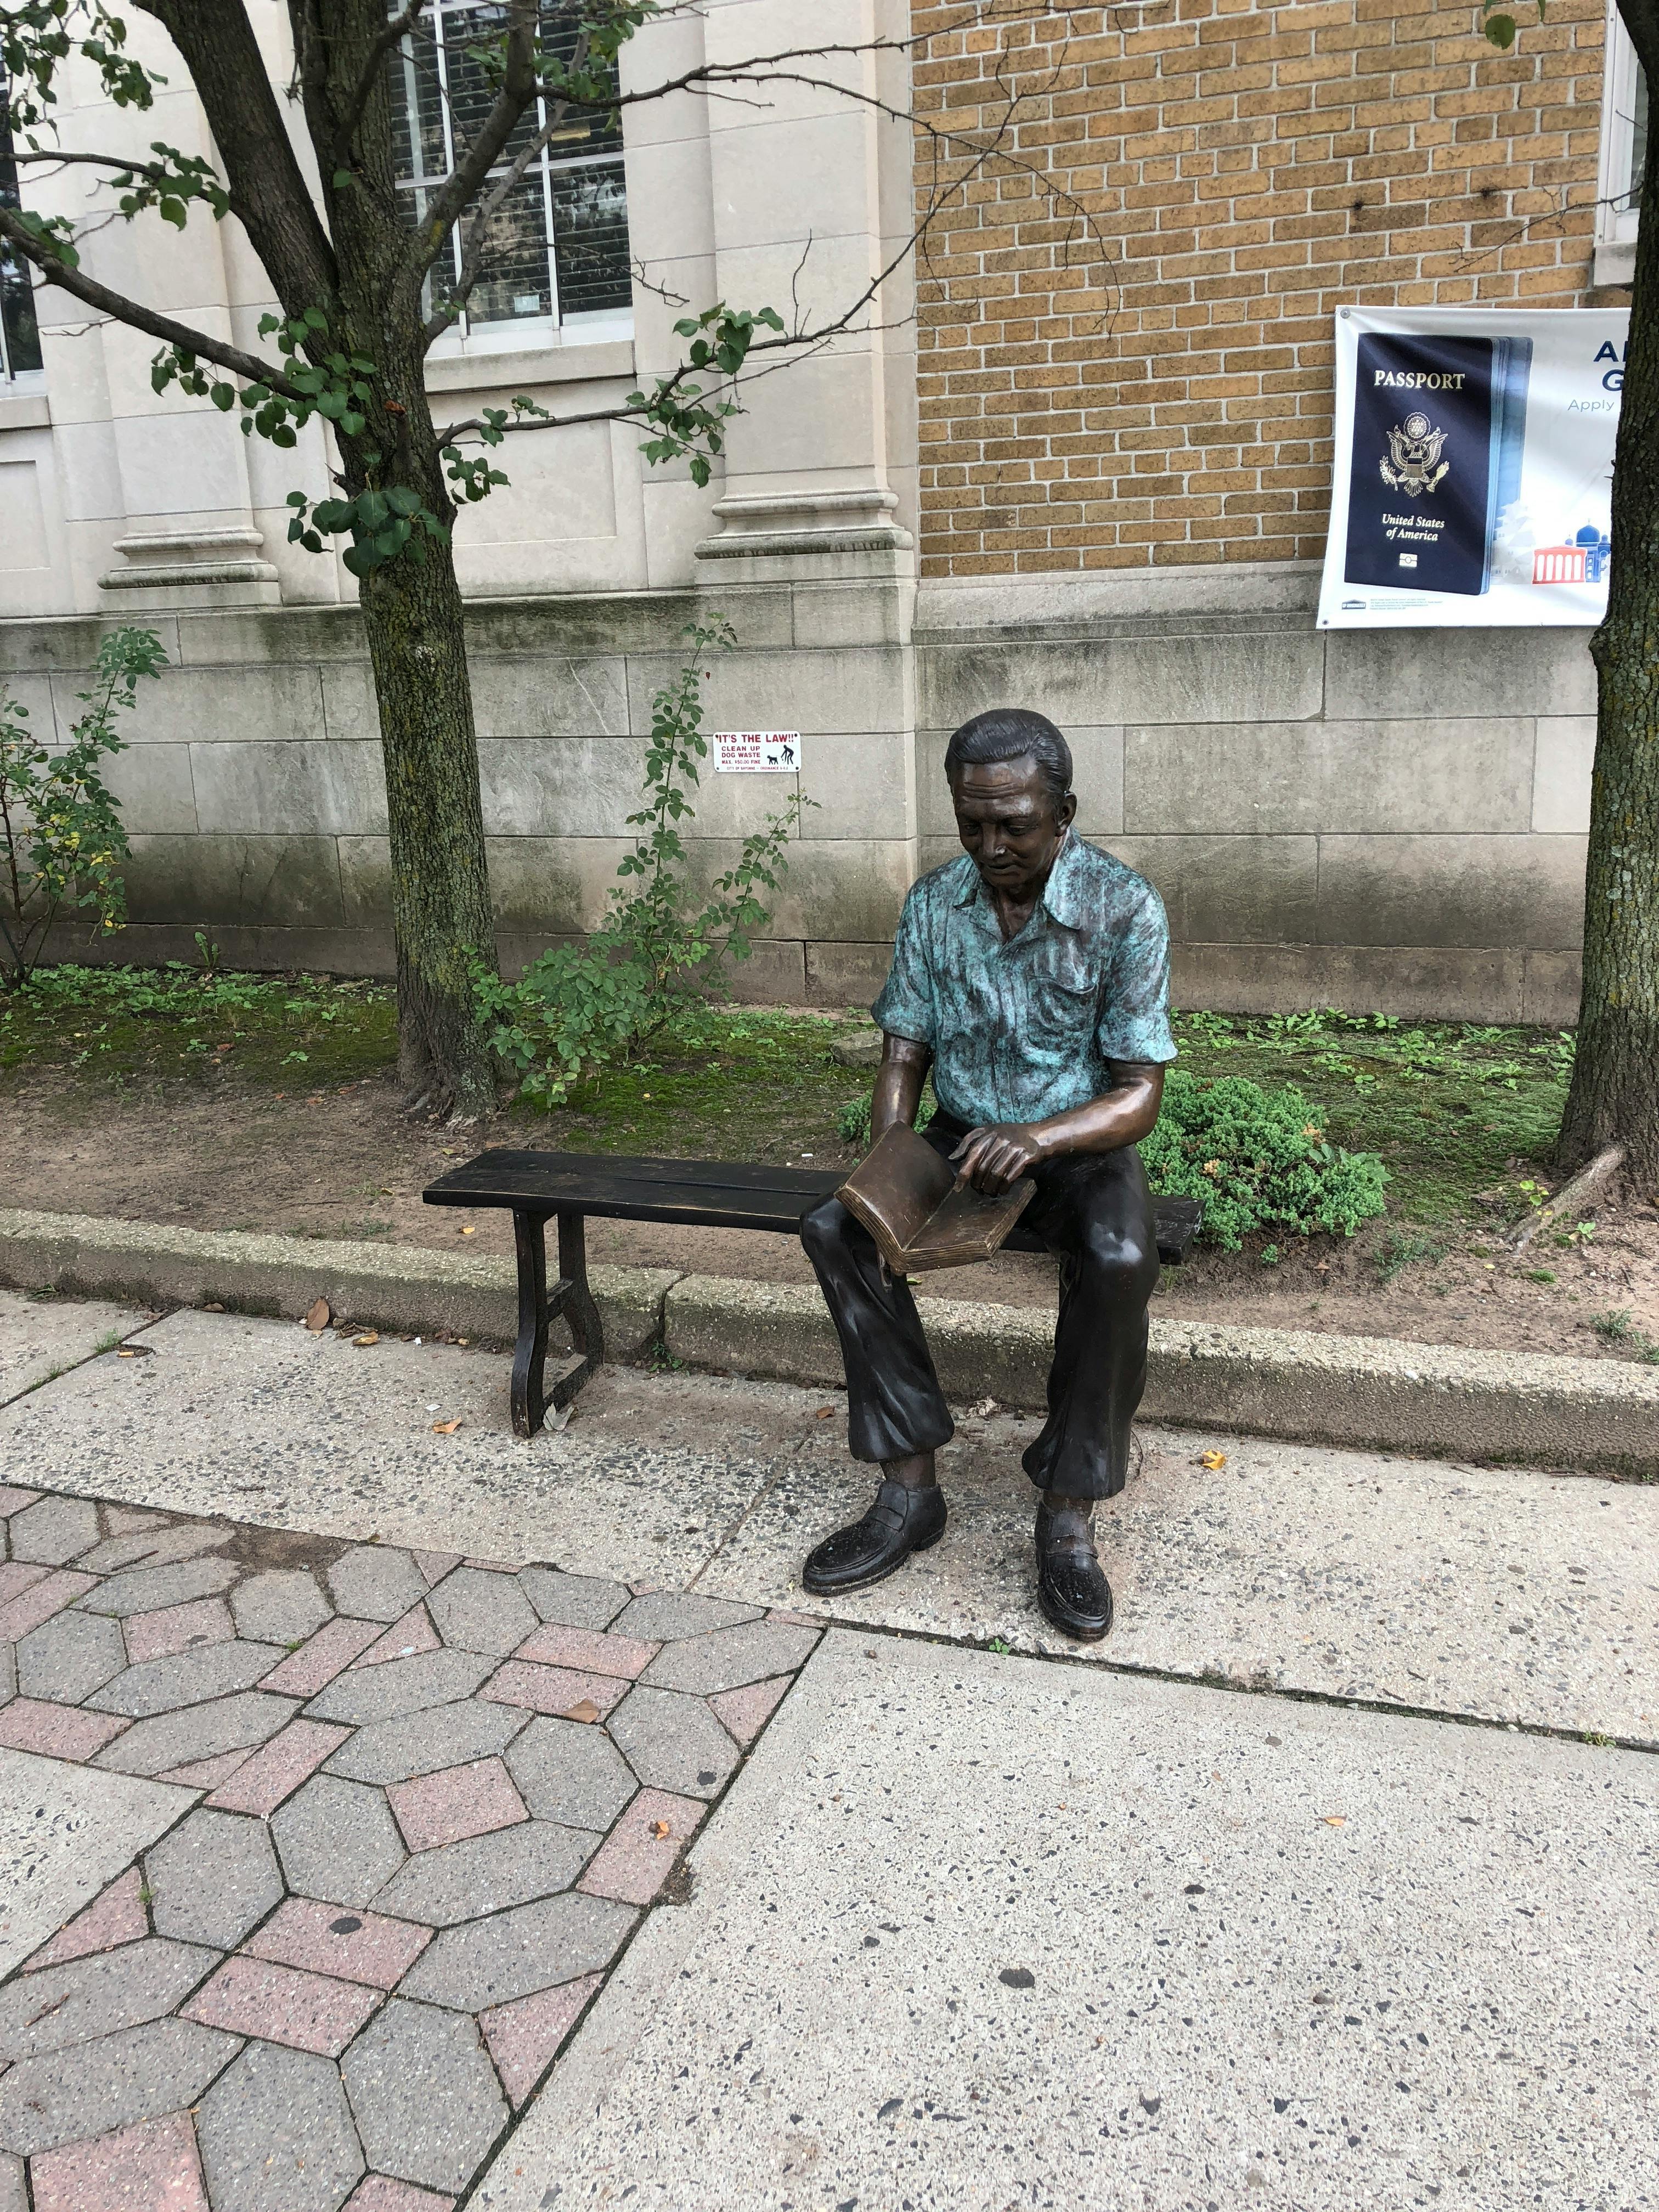 Free stock photo of Statue Bayonne statues man on bench